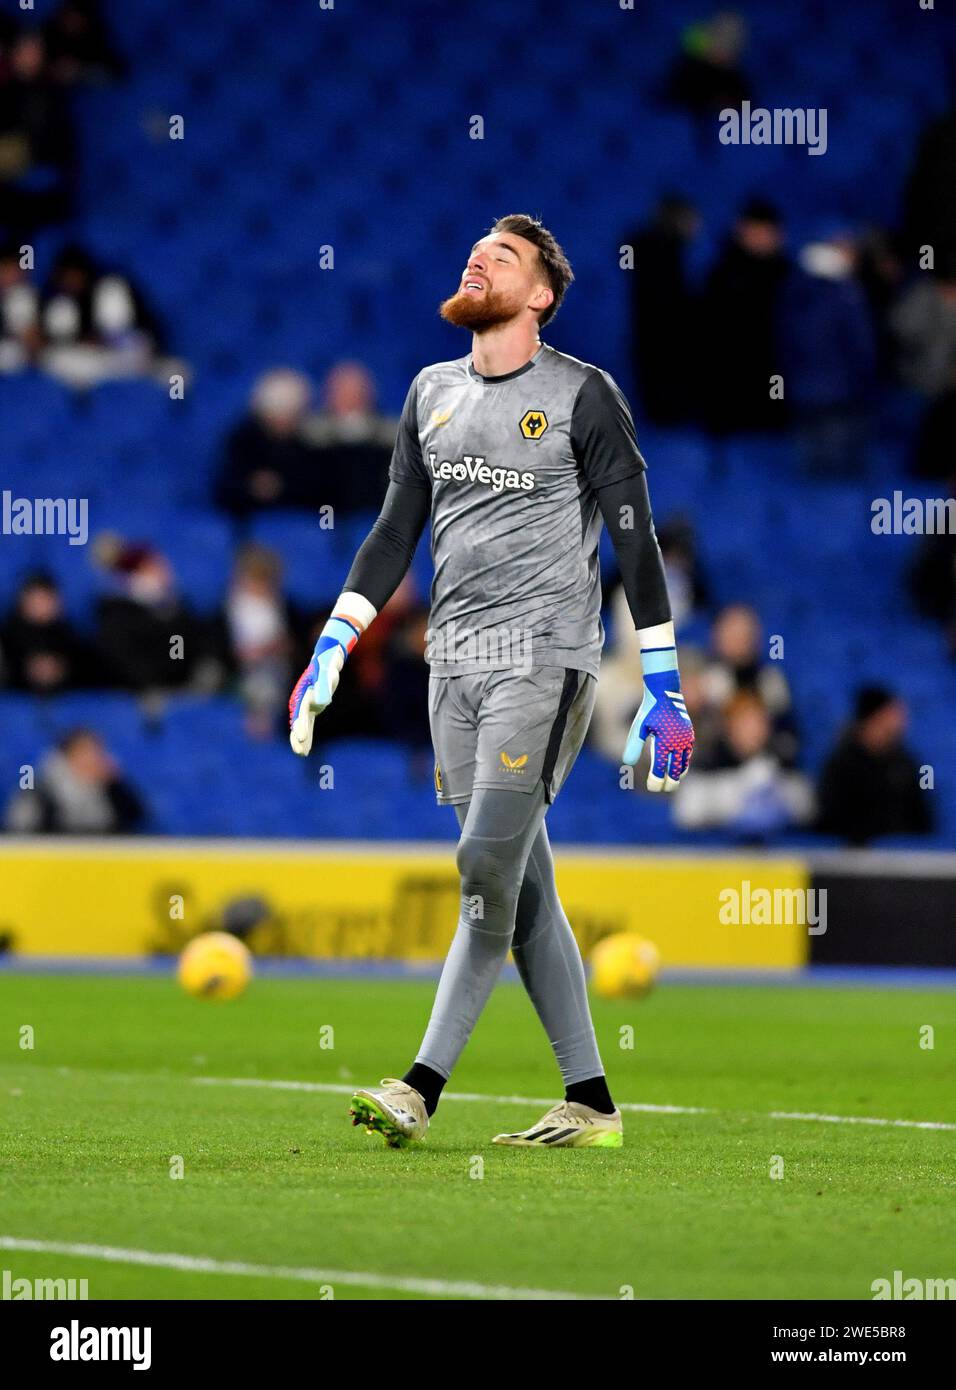 Jose Sa of Wolves warms up and looks to the skies during the Premier League match between Brighton and Hove Albion and Wolverhampton Wanderers at the American Express Stadium  , Brighton , UK - 22nd January 2024 Photo Simon Dack / Telephoto Images. Editorial use only. No merchandising. For Football images FA and Premier League restrictions apply inc. no internet/mobile usage without FAPL license - for details contact Football Dataco Stock Photo